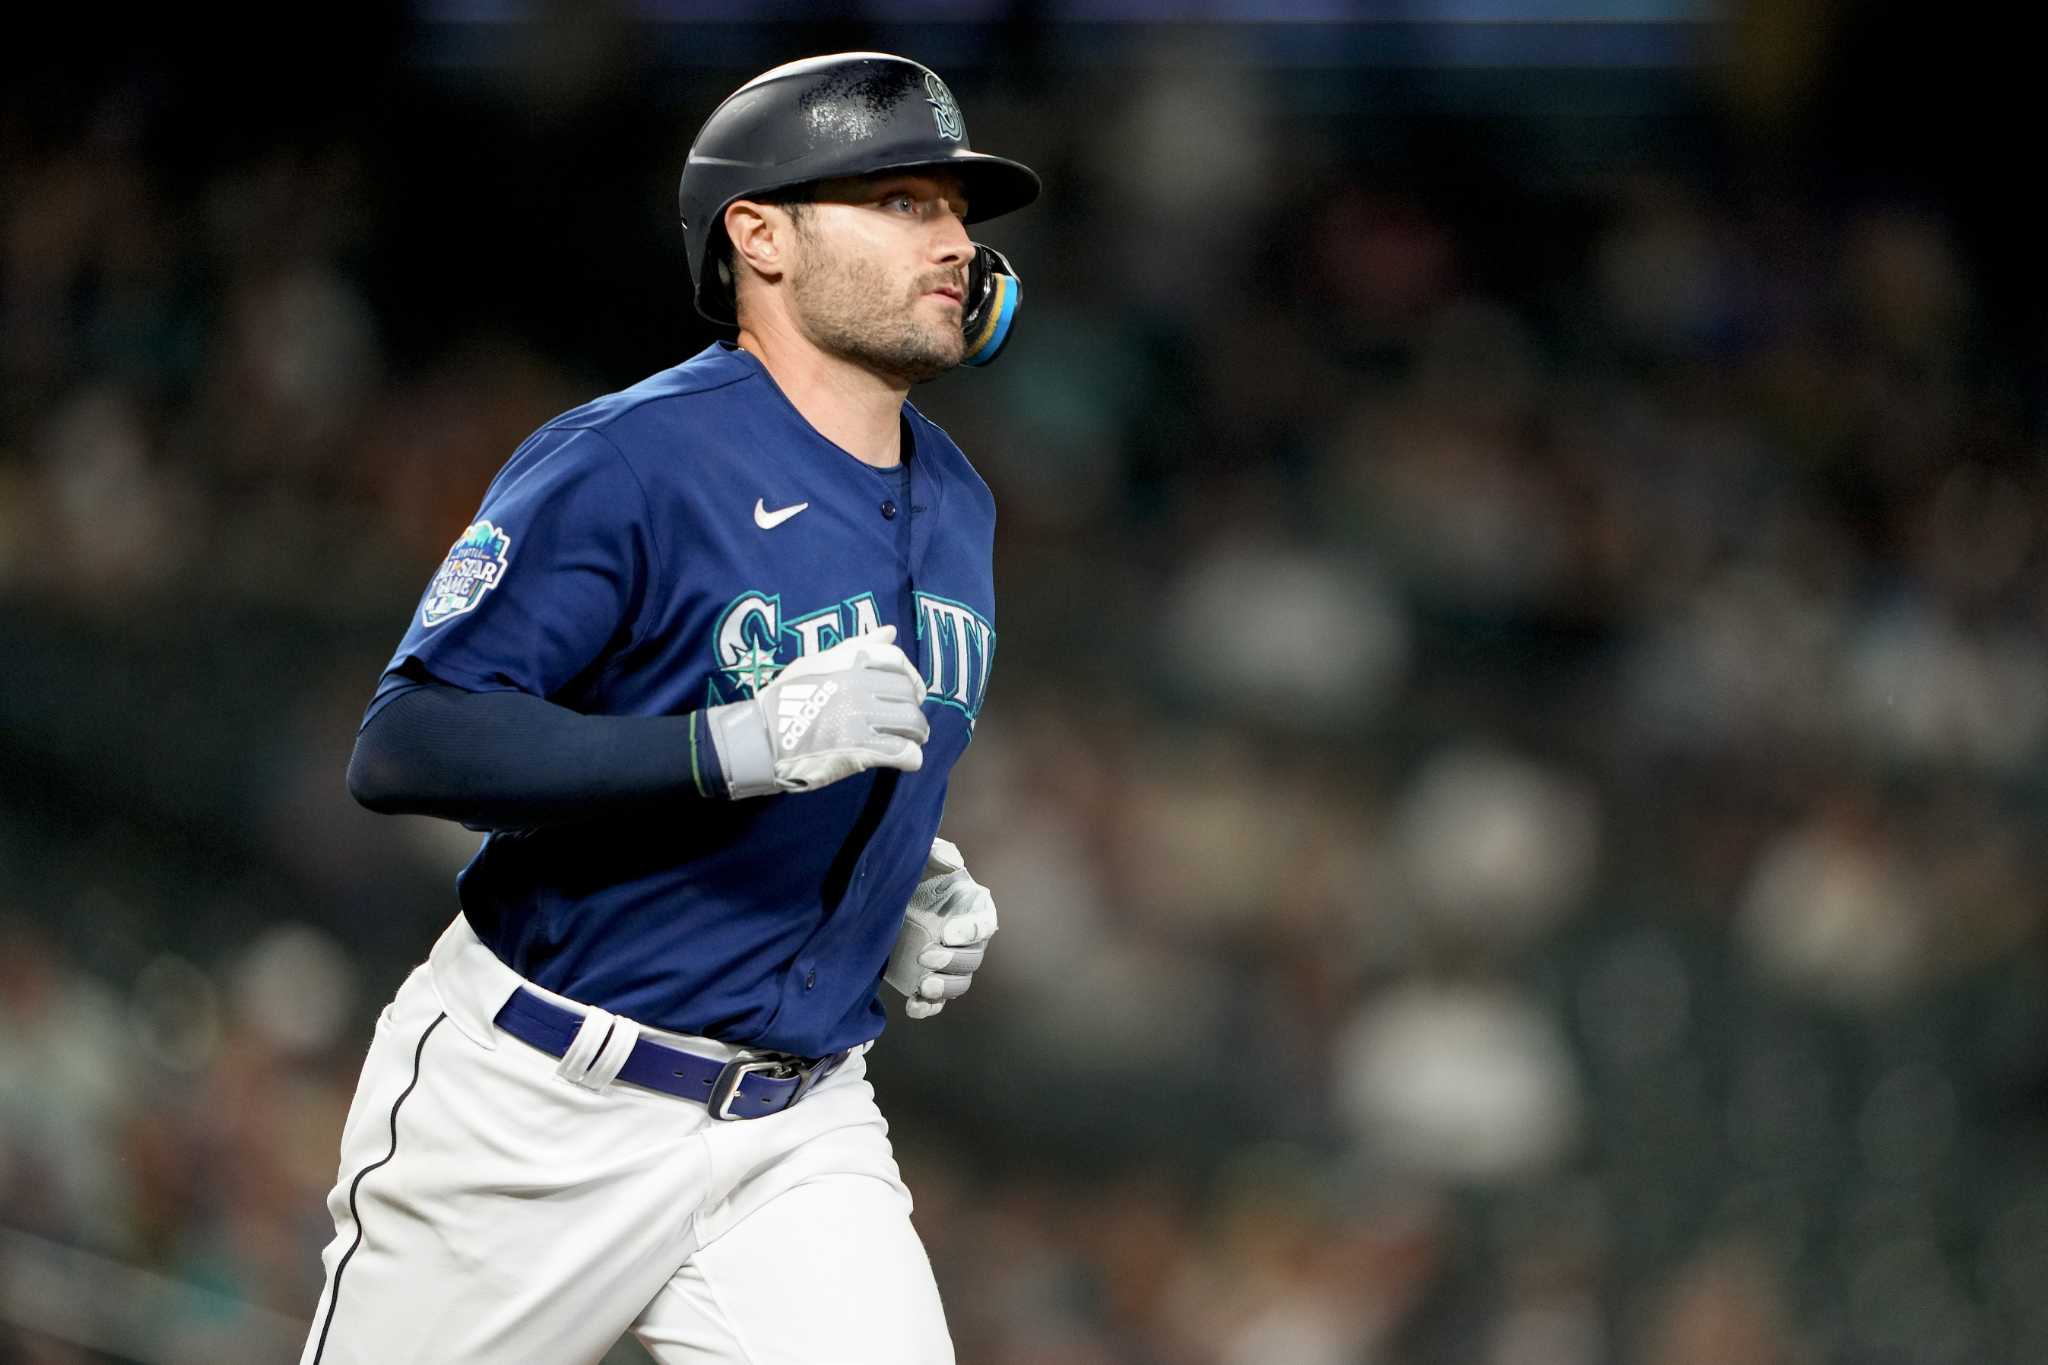 Giants get AJ Pollock from Mariners, but trade for pitcher unlikely